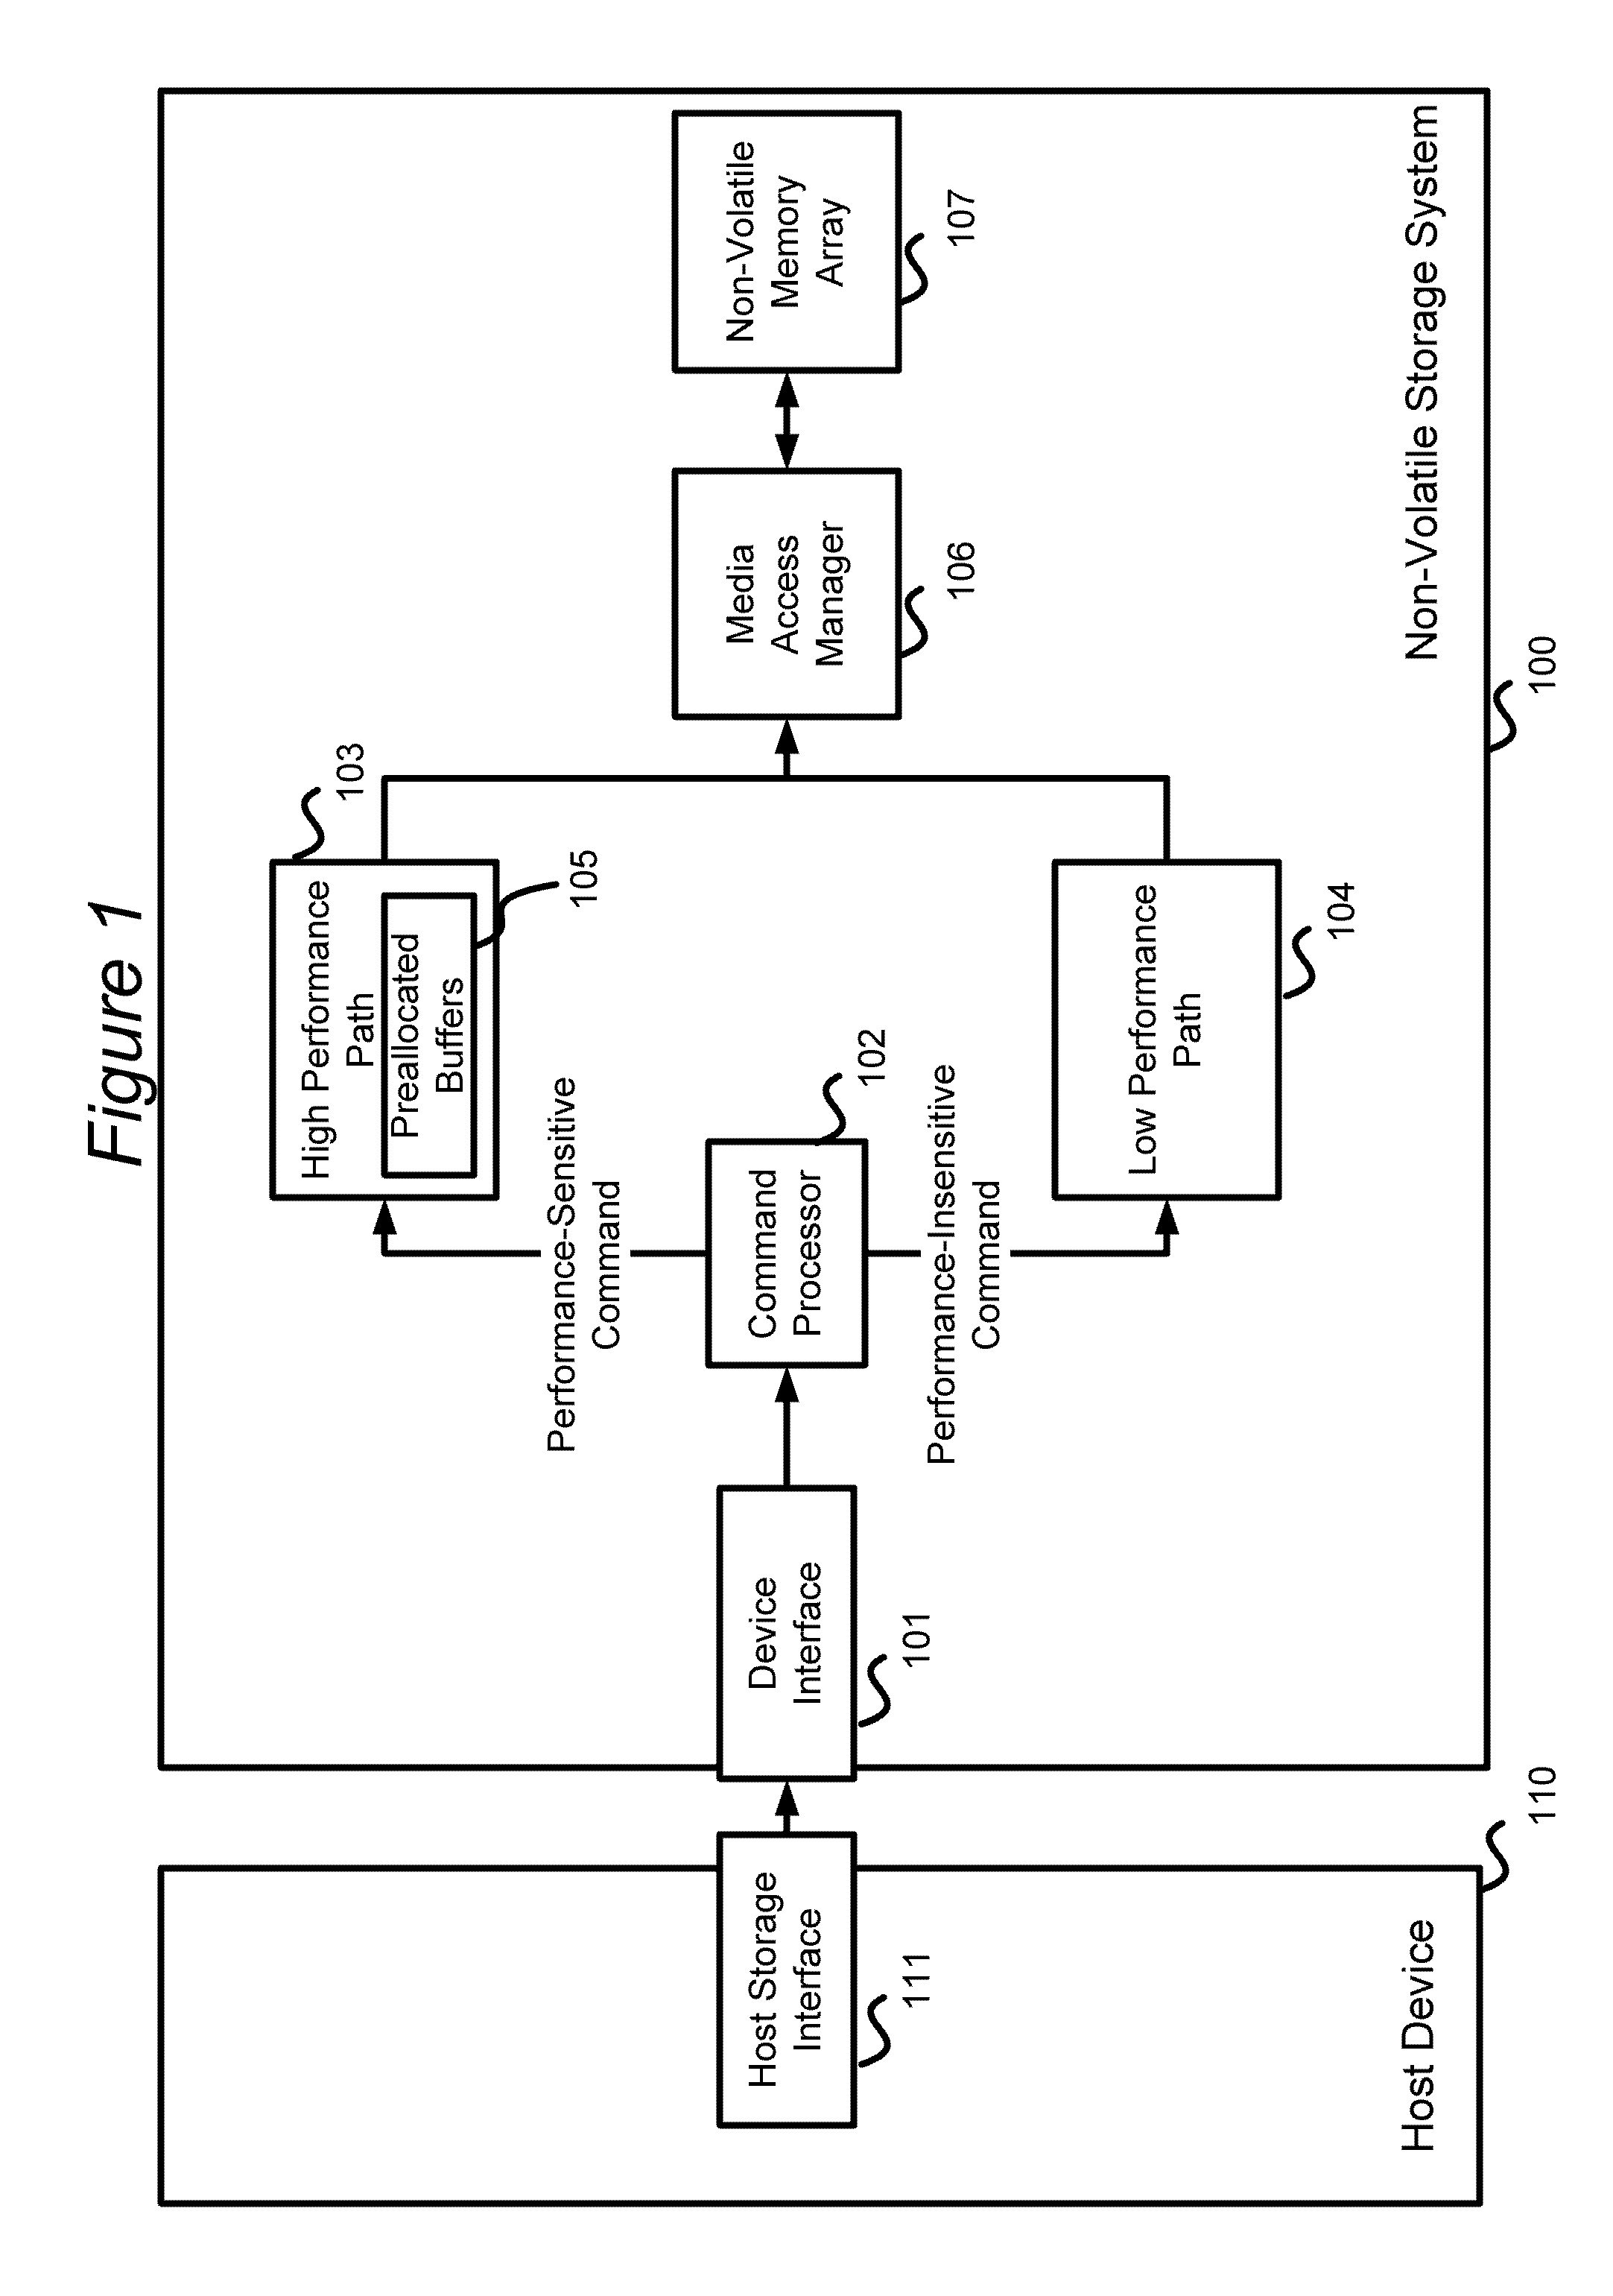 High performance path for command processing